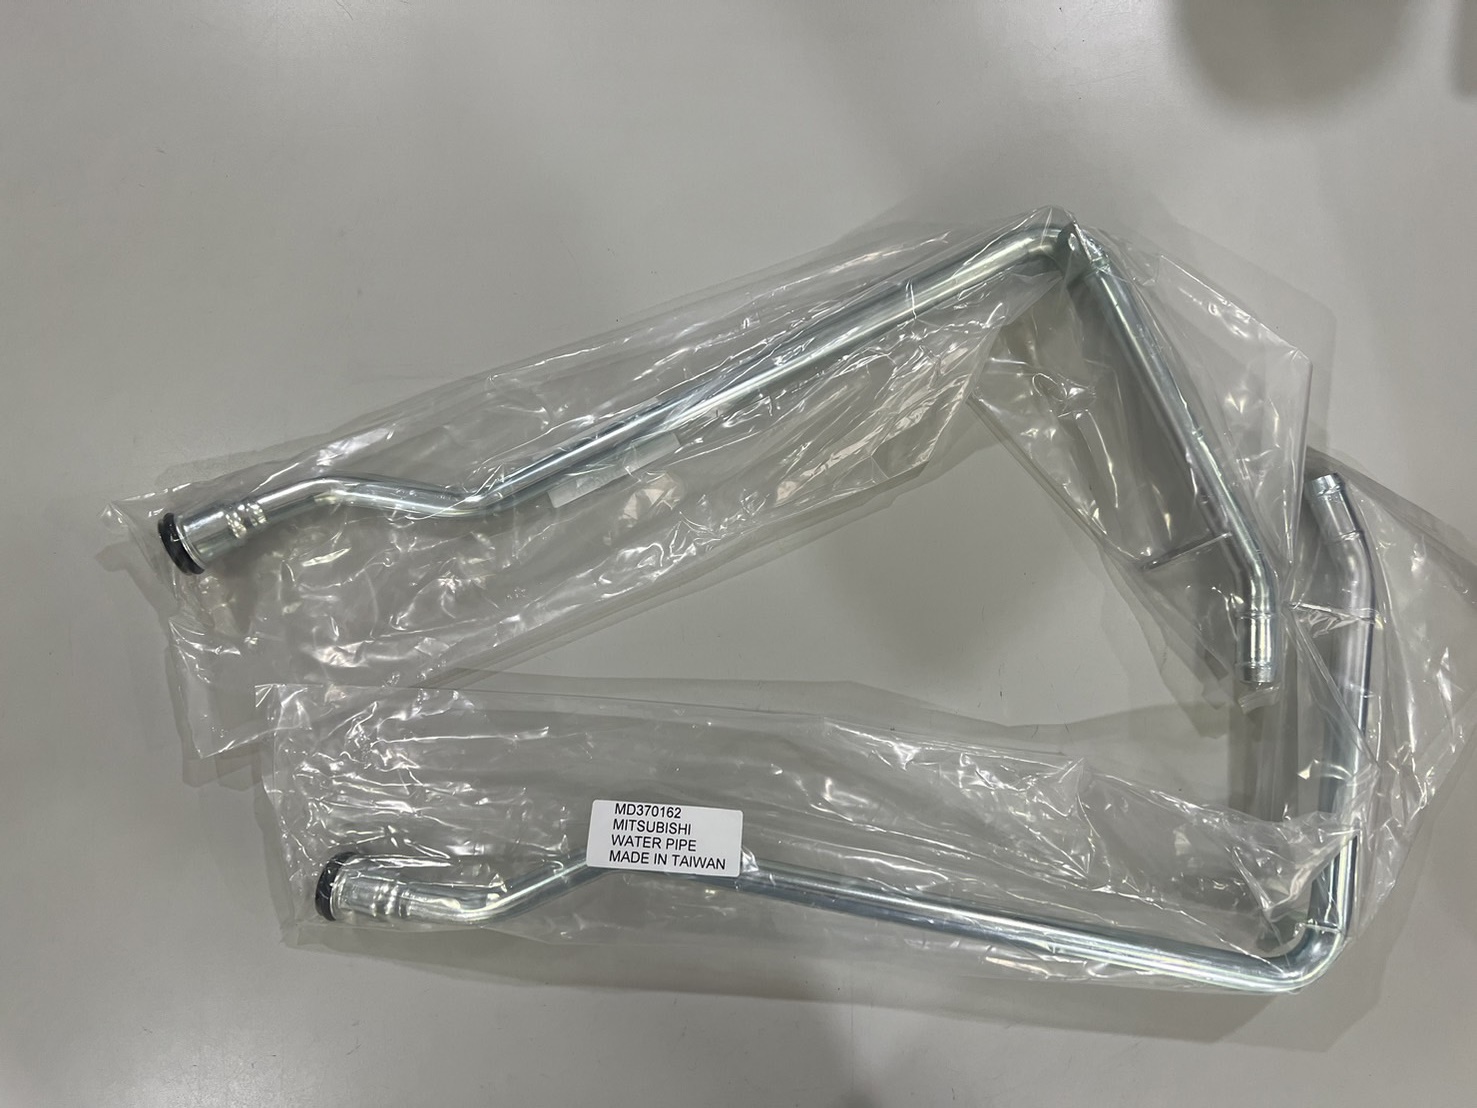 WATER PIPE FOR MITSUBISHI-OE:MD370162-MD370162